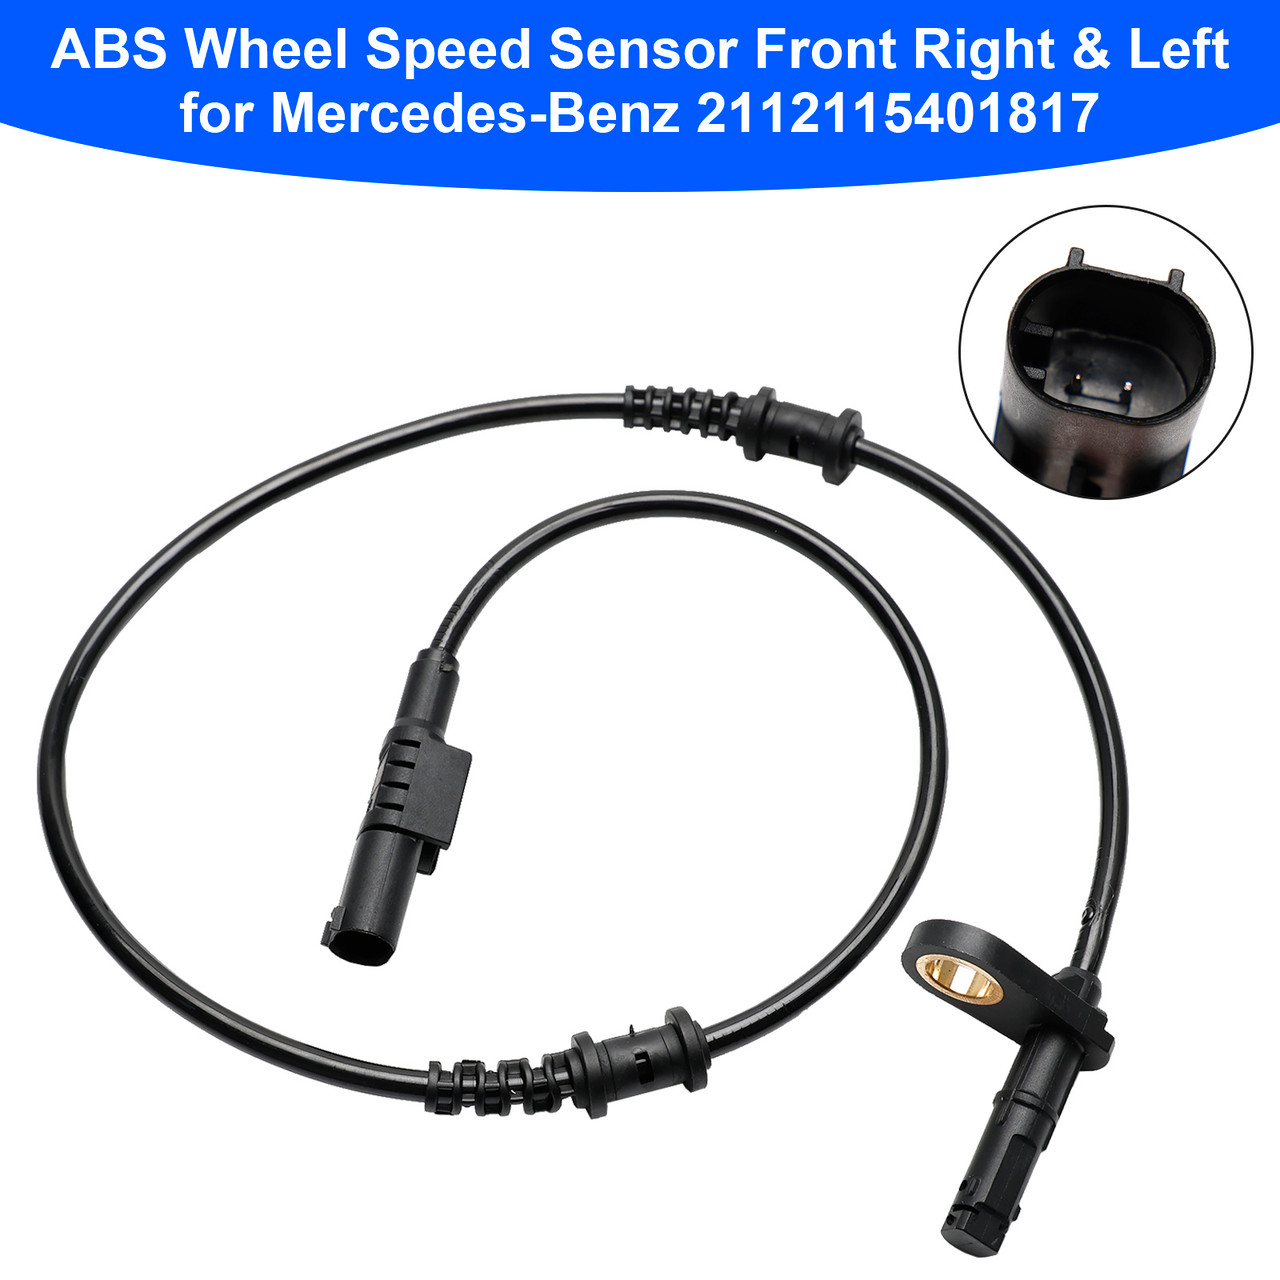 ABS Wheel Speed Sensor Front Right & Left for Mercedes-Benz 2112115401817